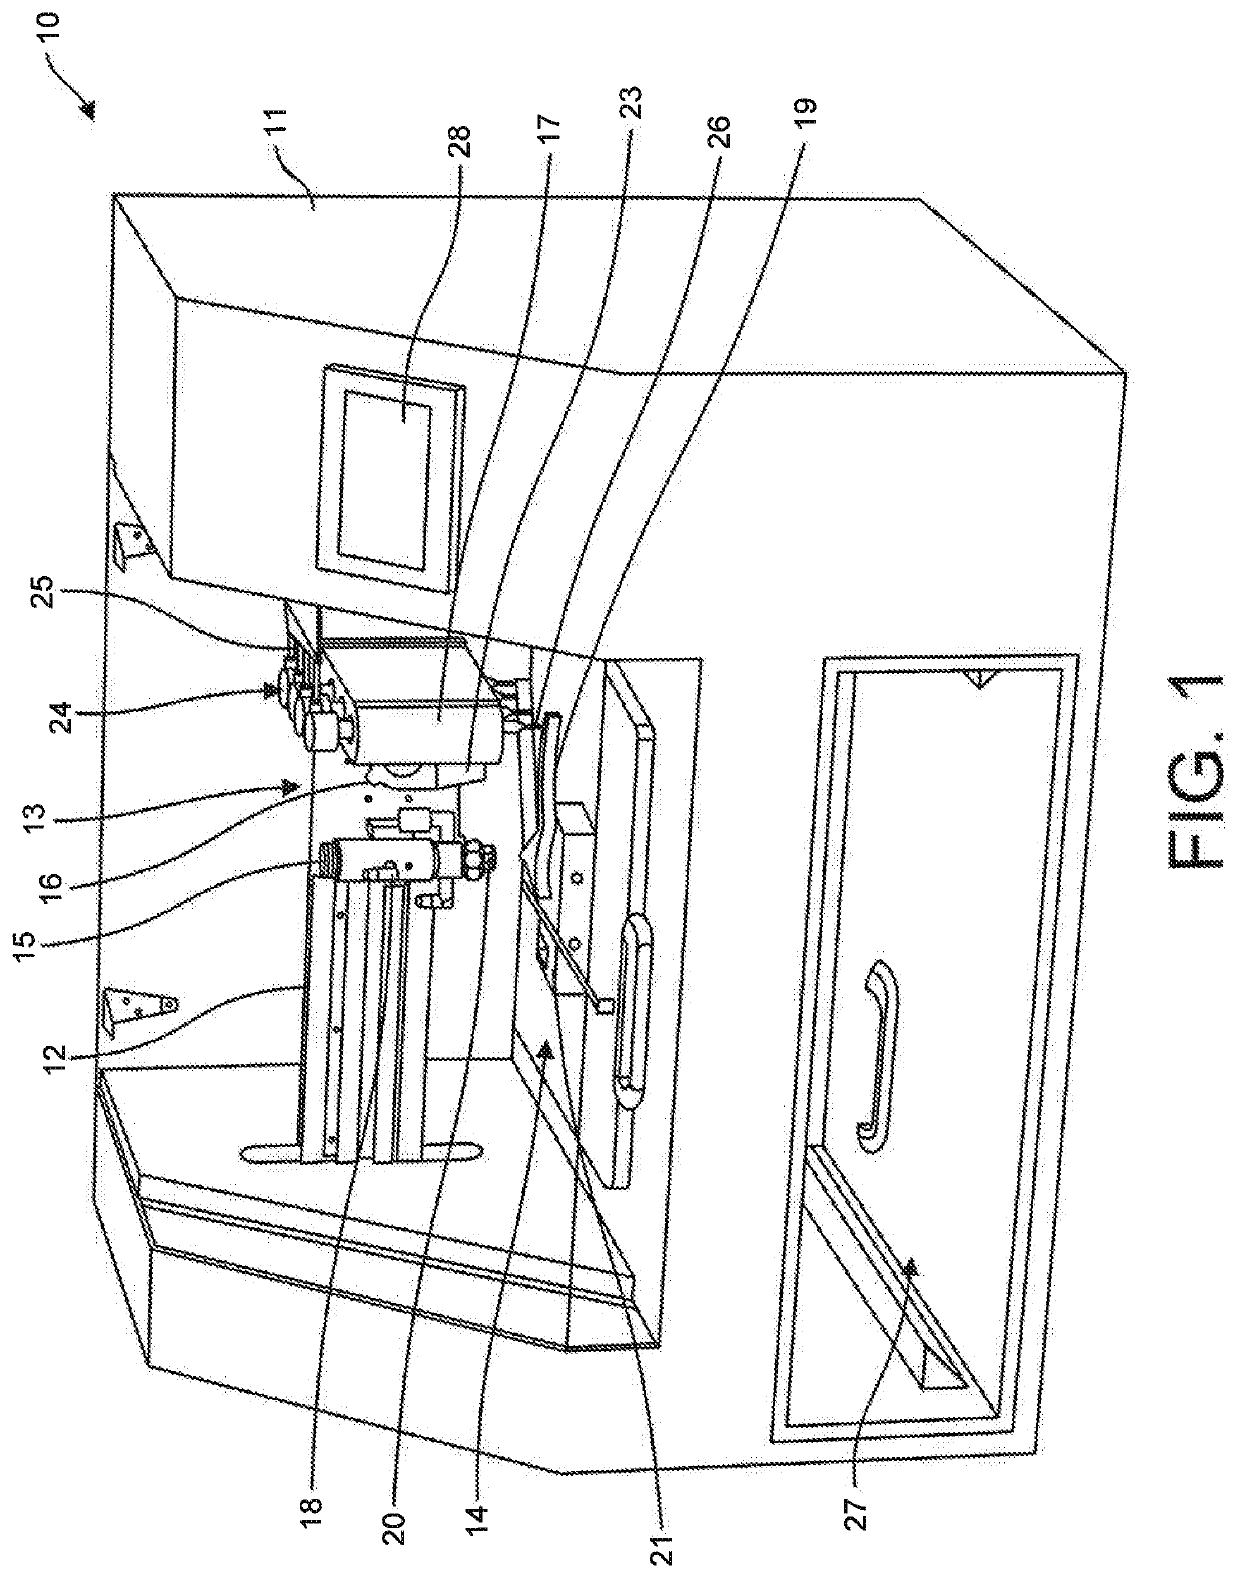 3D colored dot printing apparatus and method for color coding